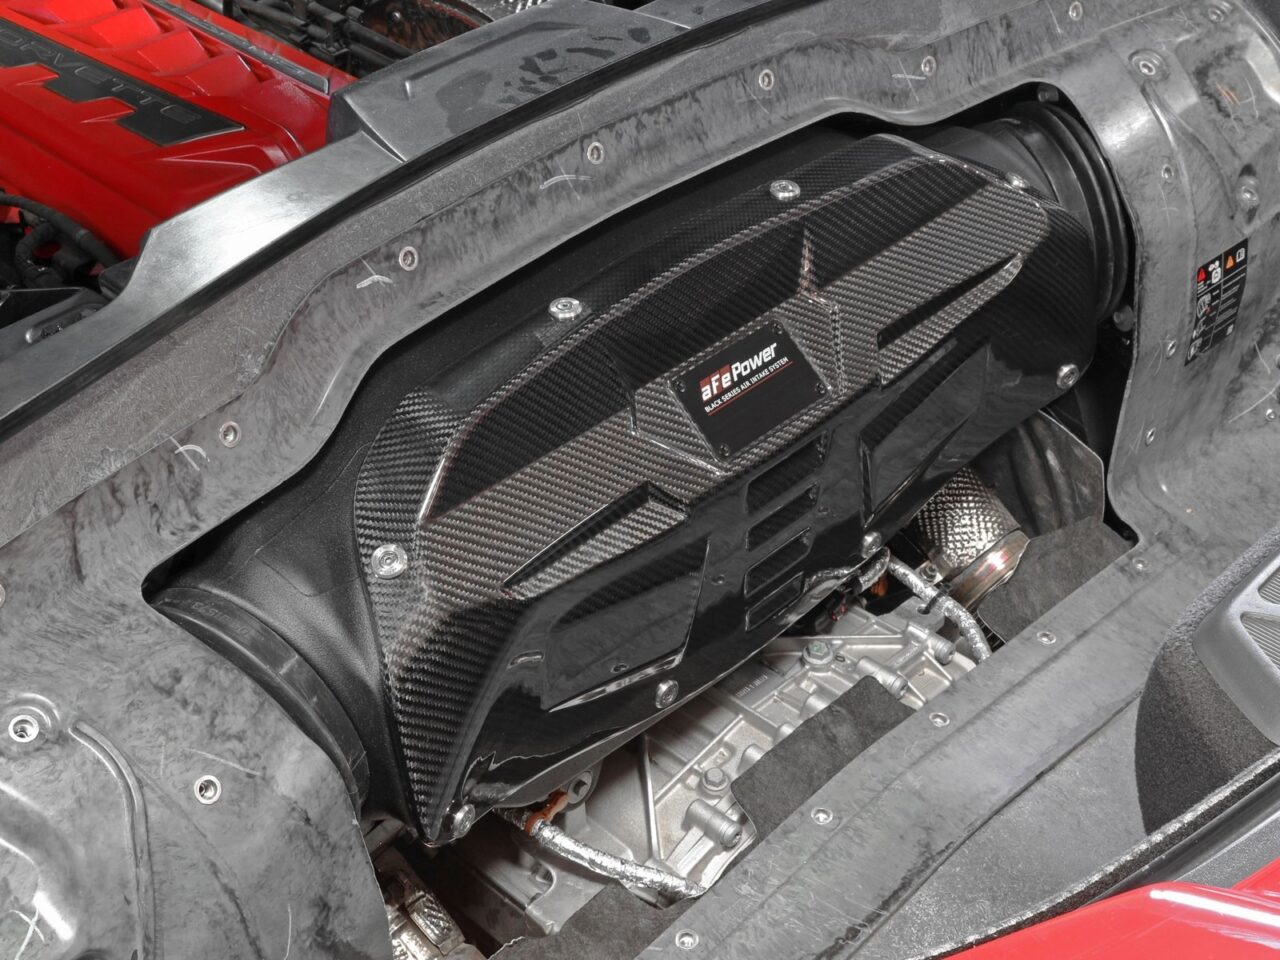 aFe POWER closed carbon fiber intake system installed under the hood of 2021 Chevy Corvette C8